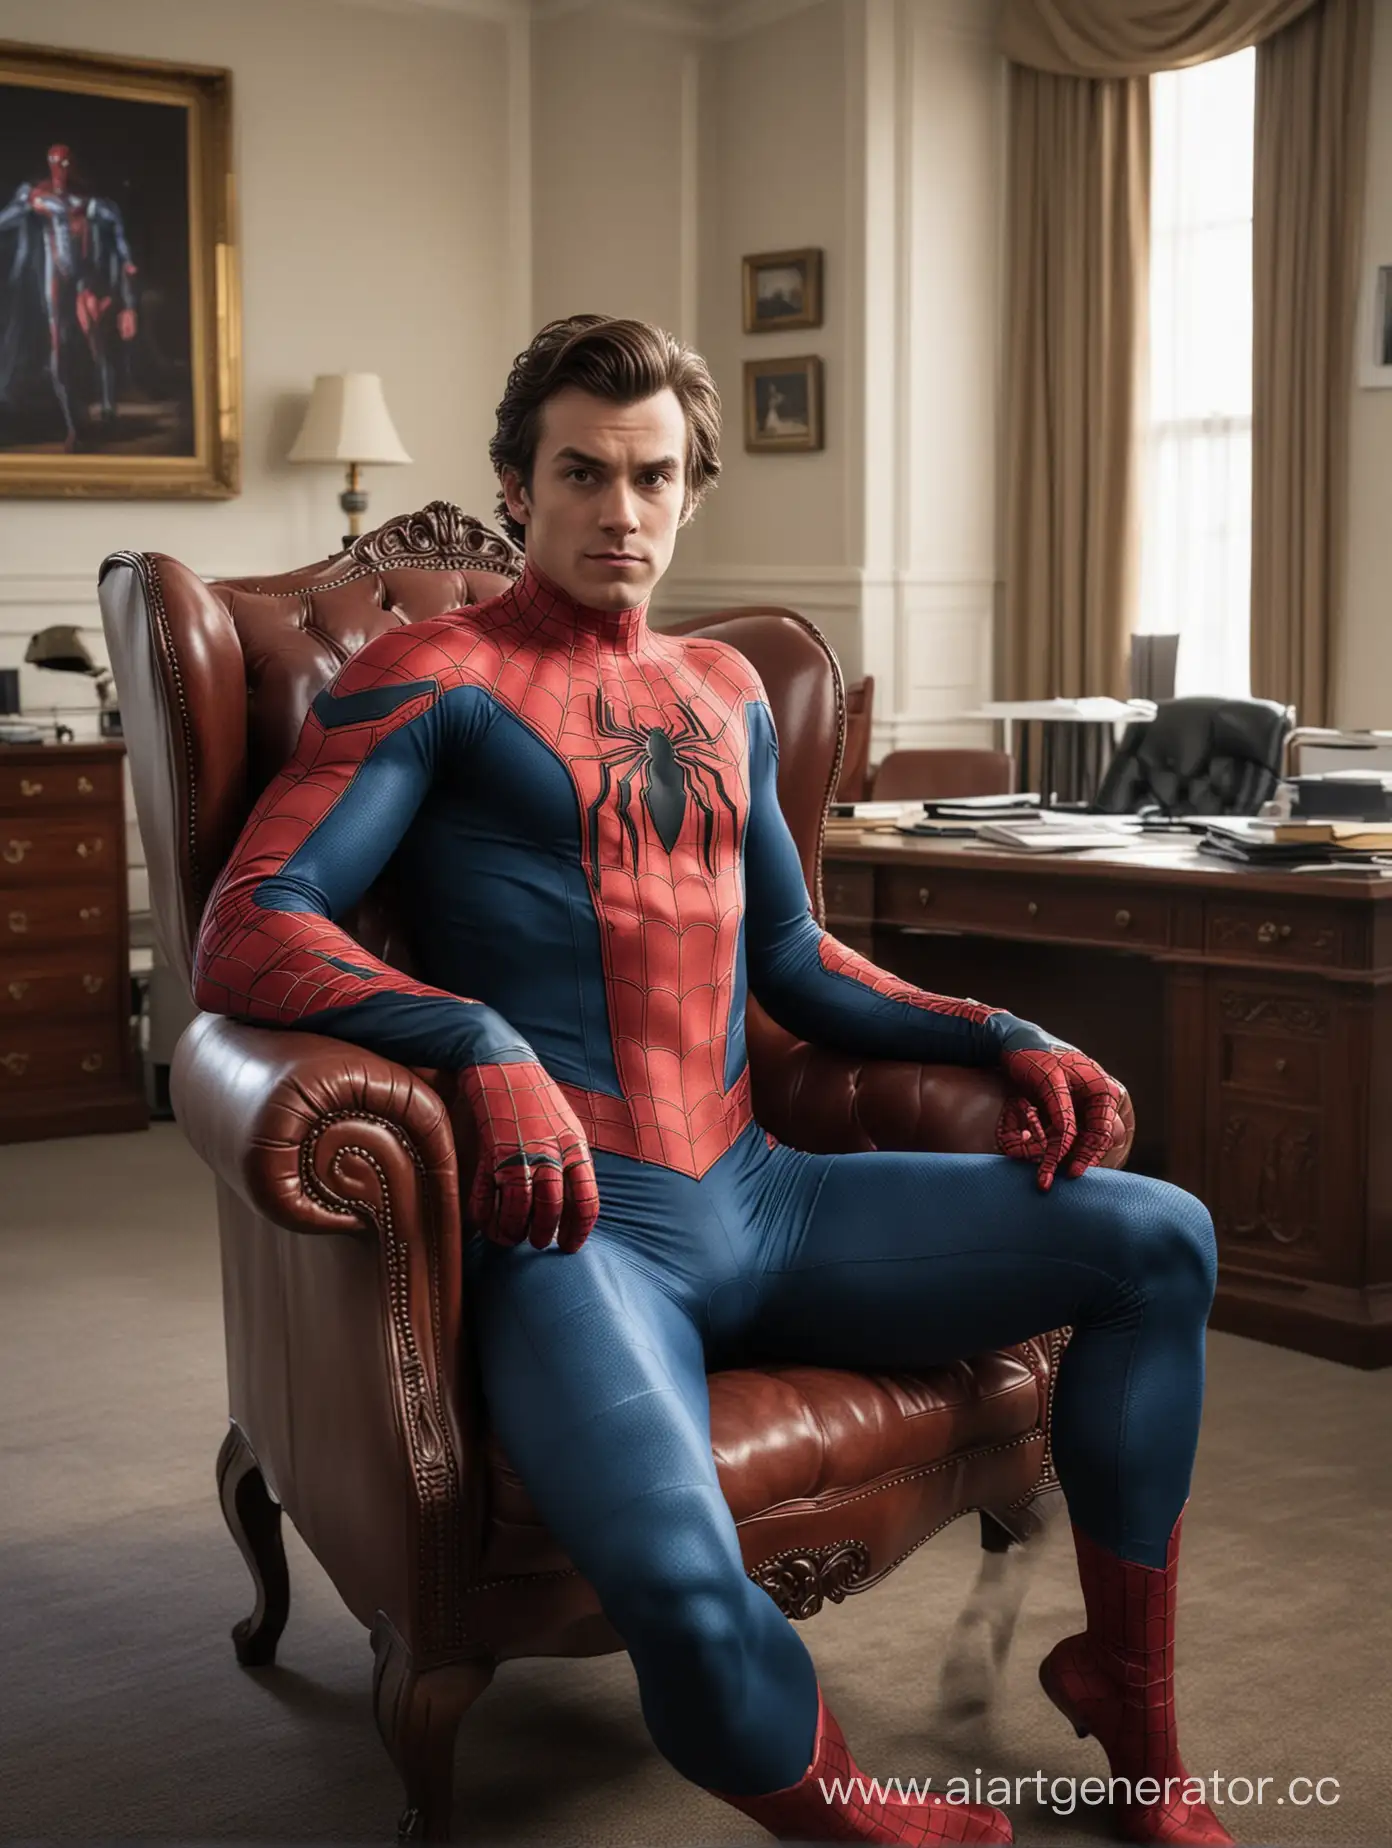 Thomas-Stanley-as-SpiderMan-in-a-Luxurious-Office-Setting